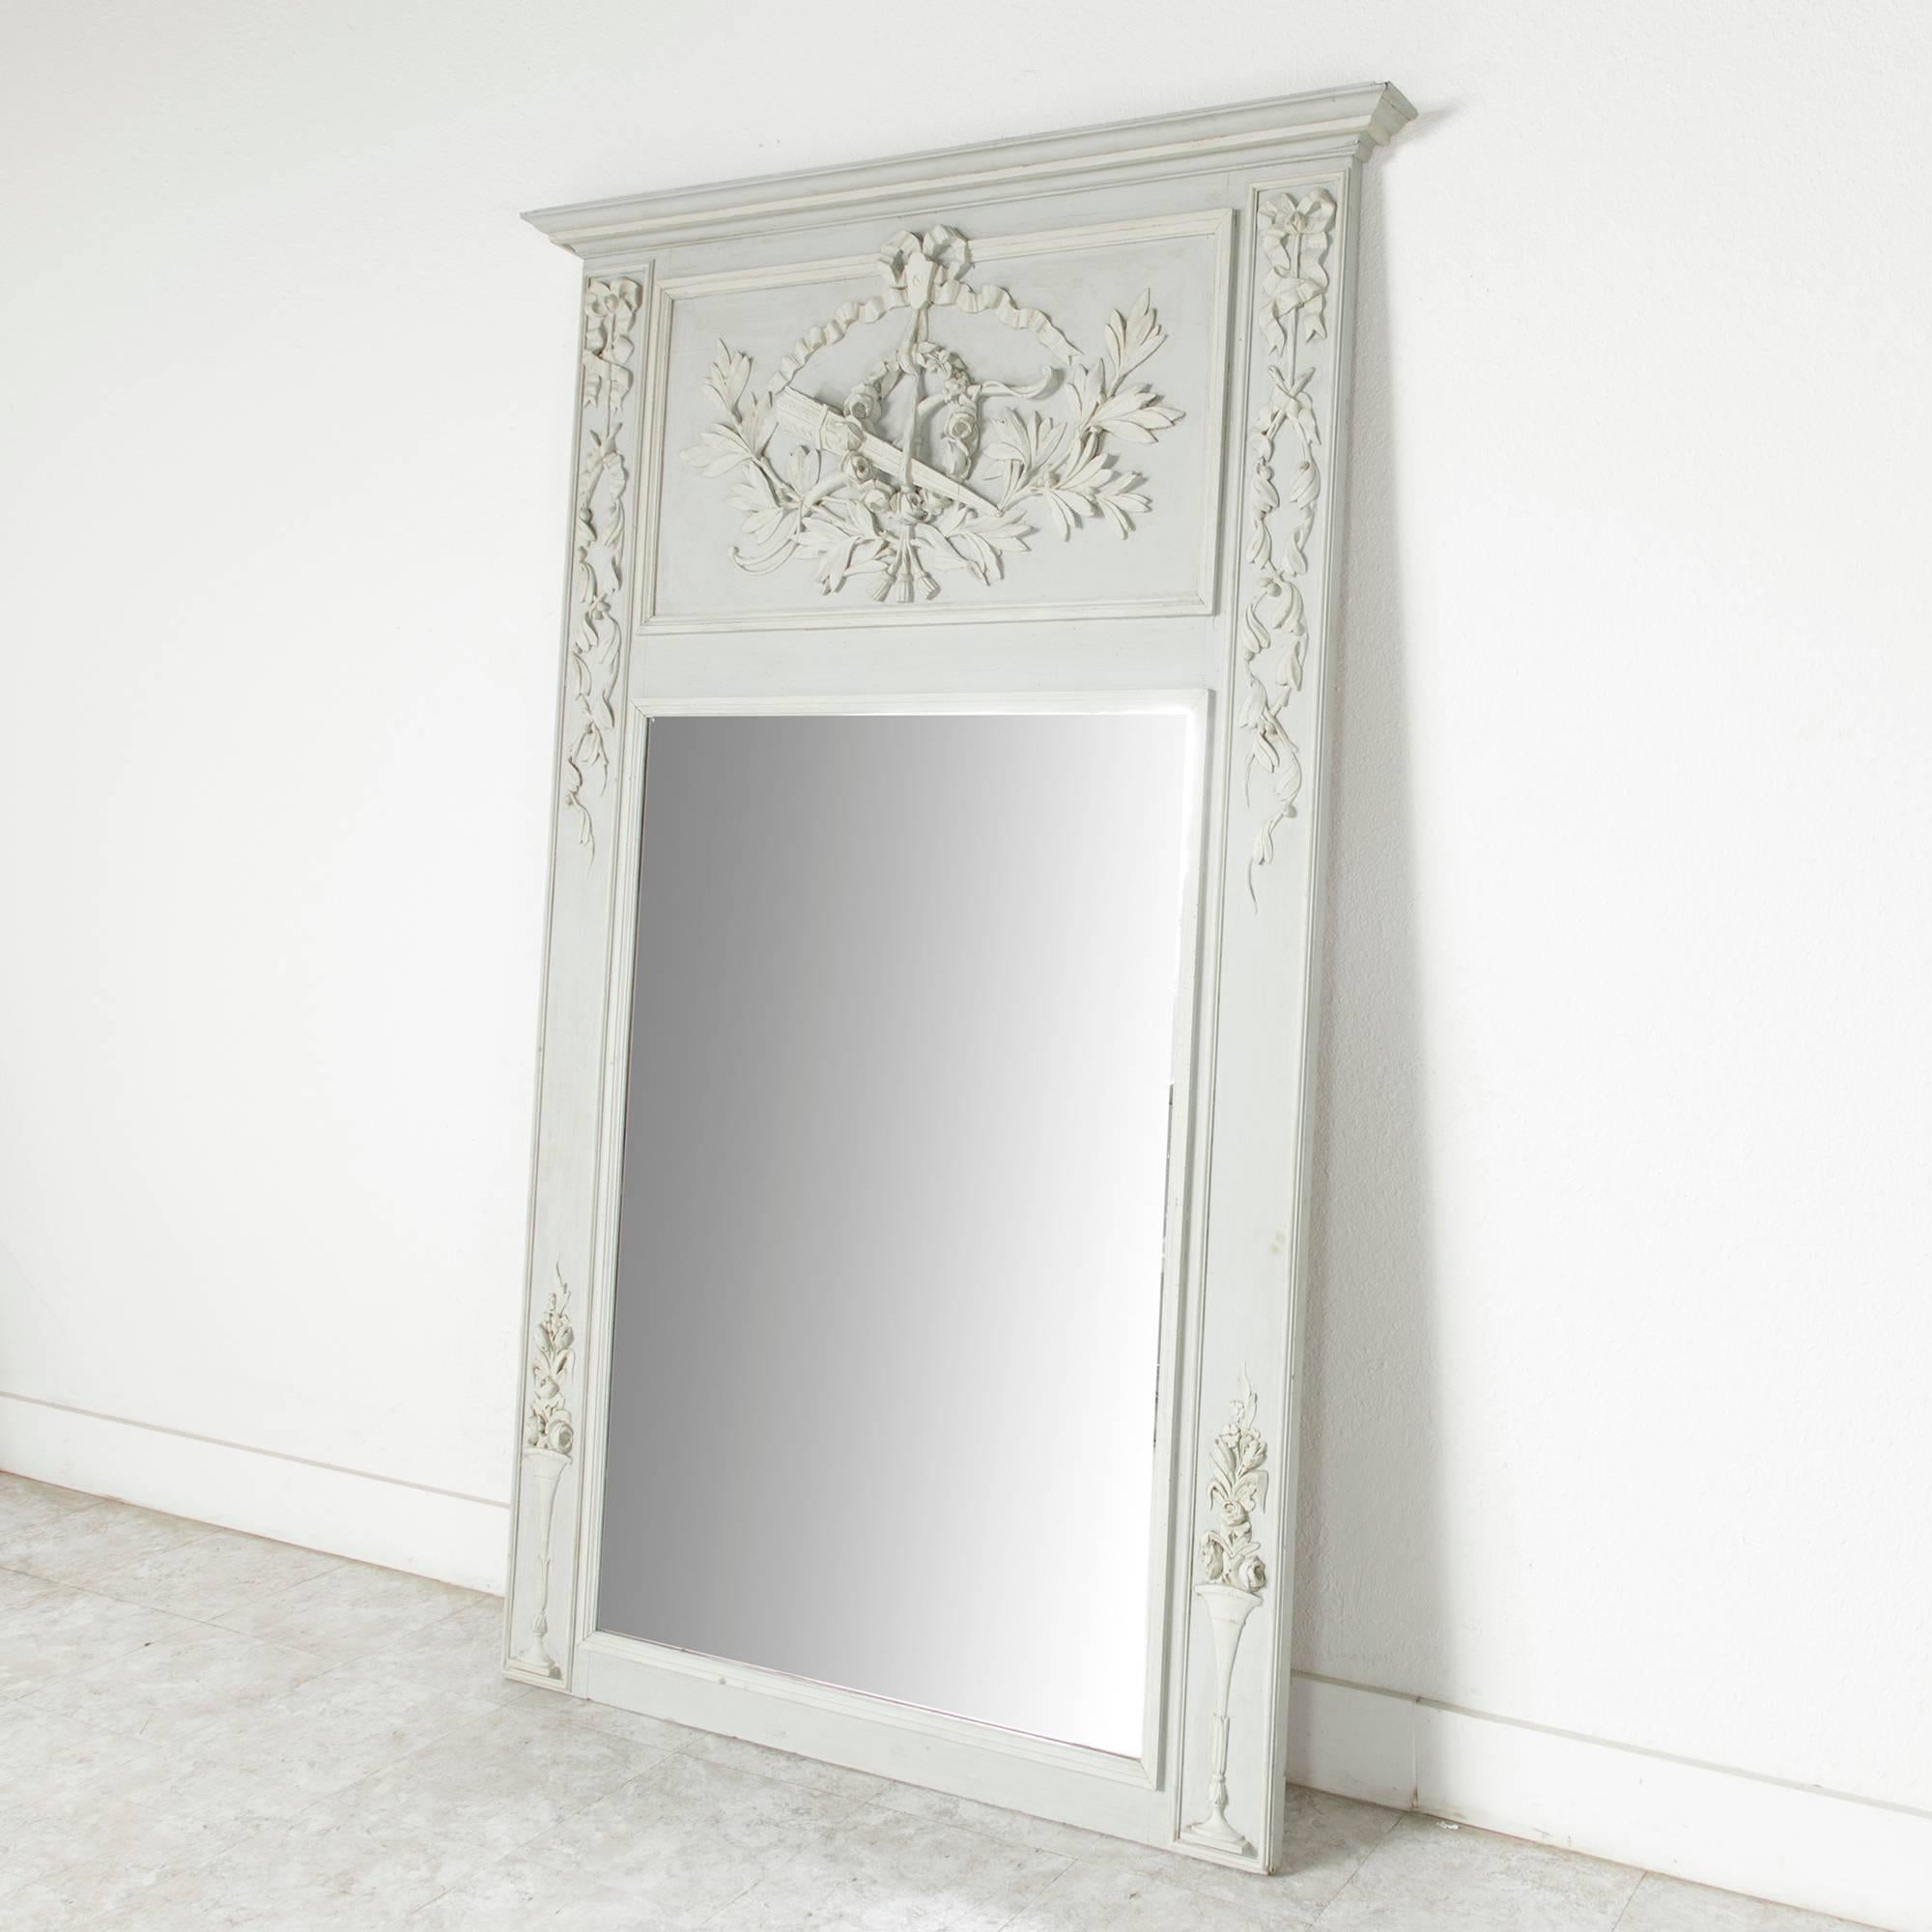 Grand 19th Century Carved and Painted Louis XVI Style Trumeau or Mantel Mirror 3